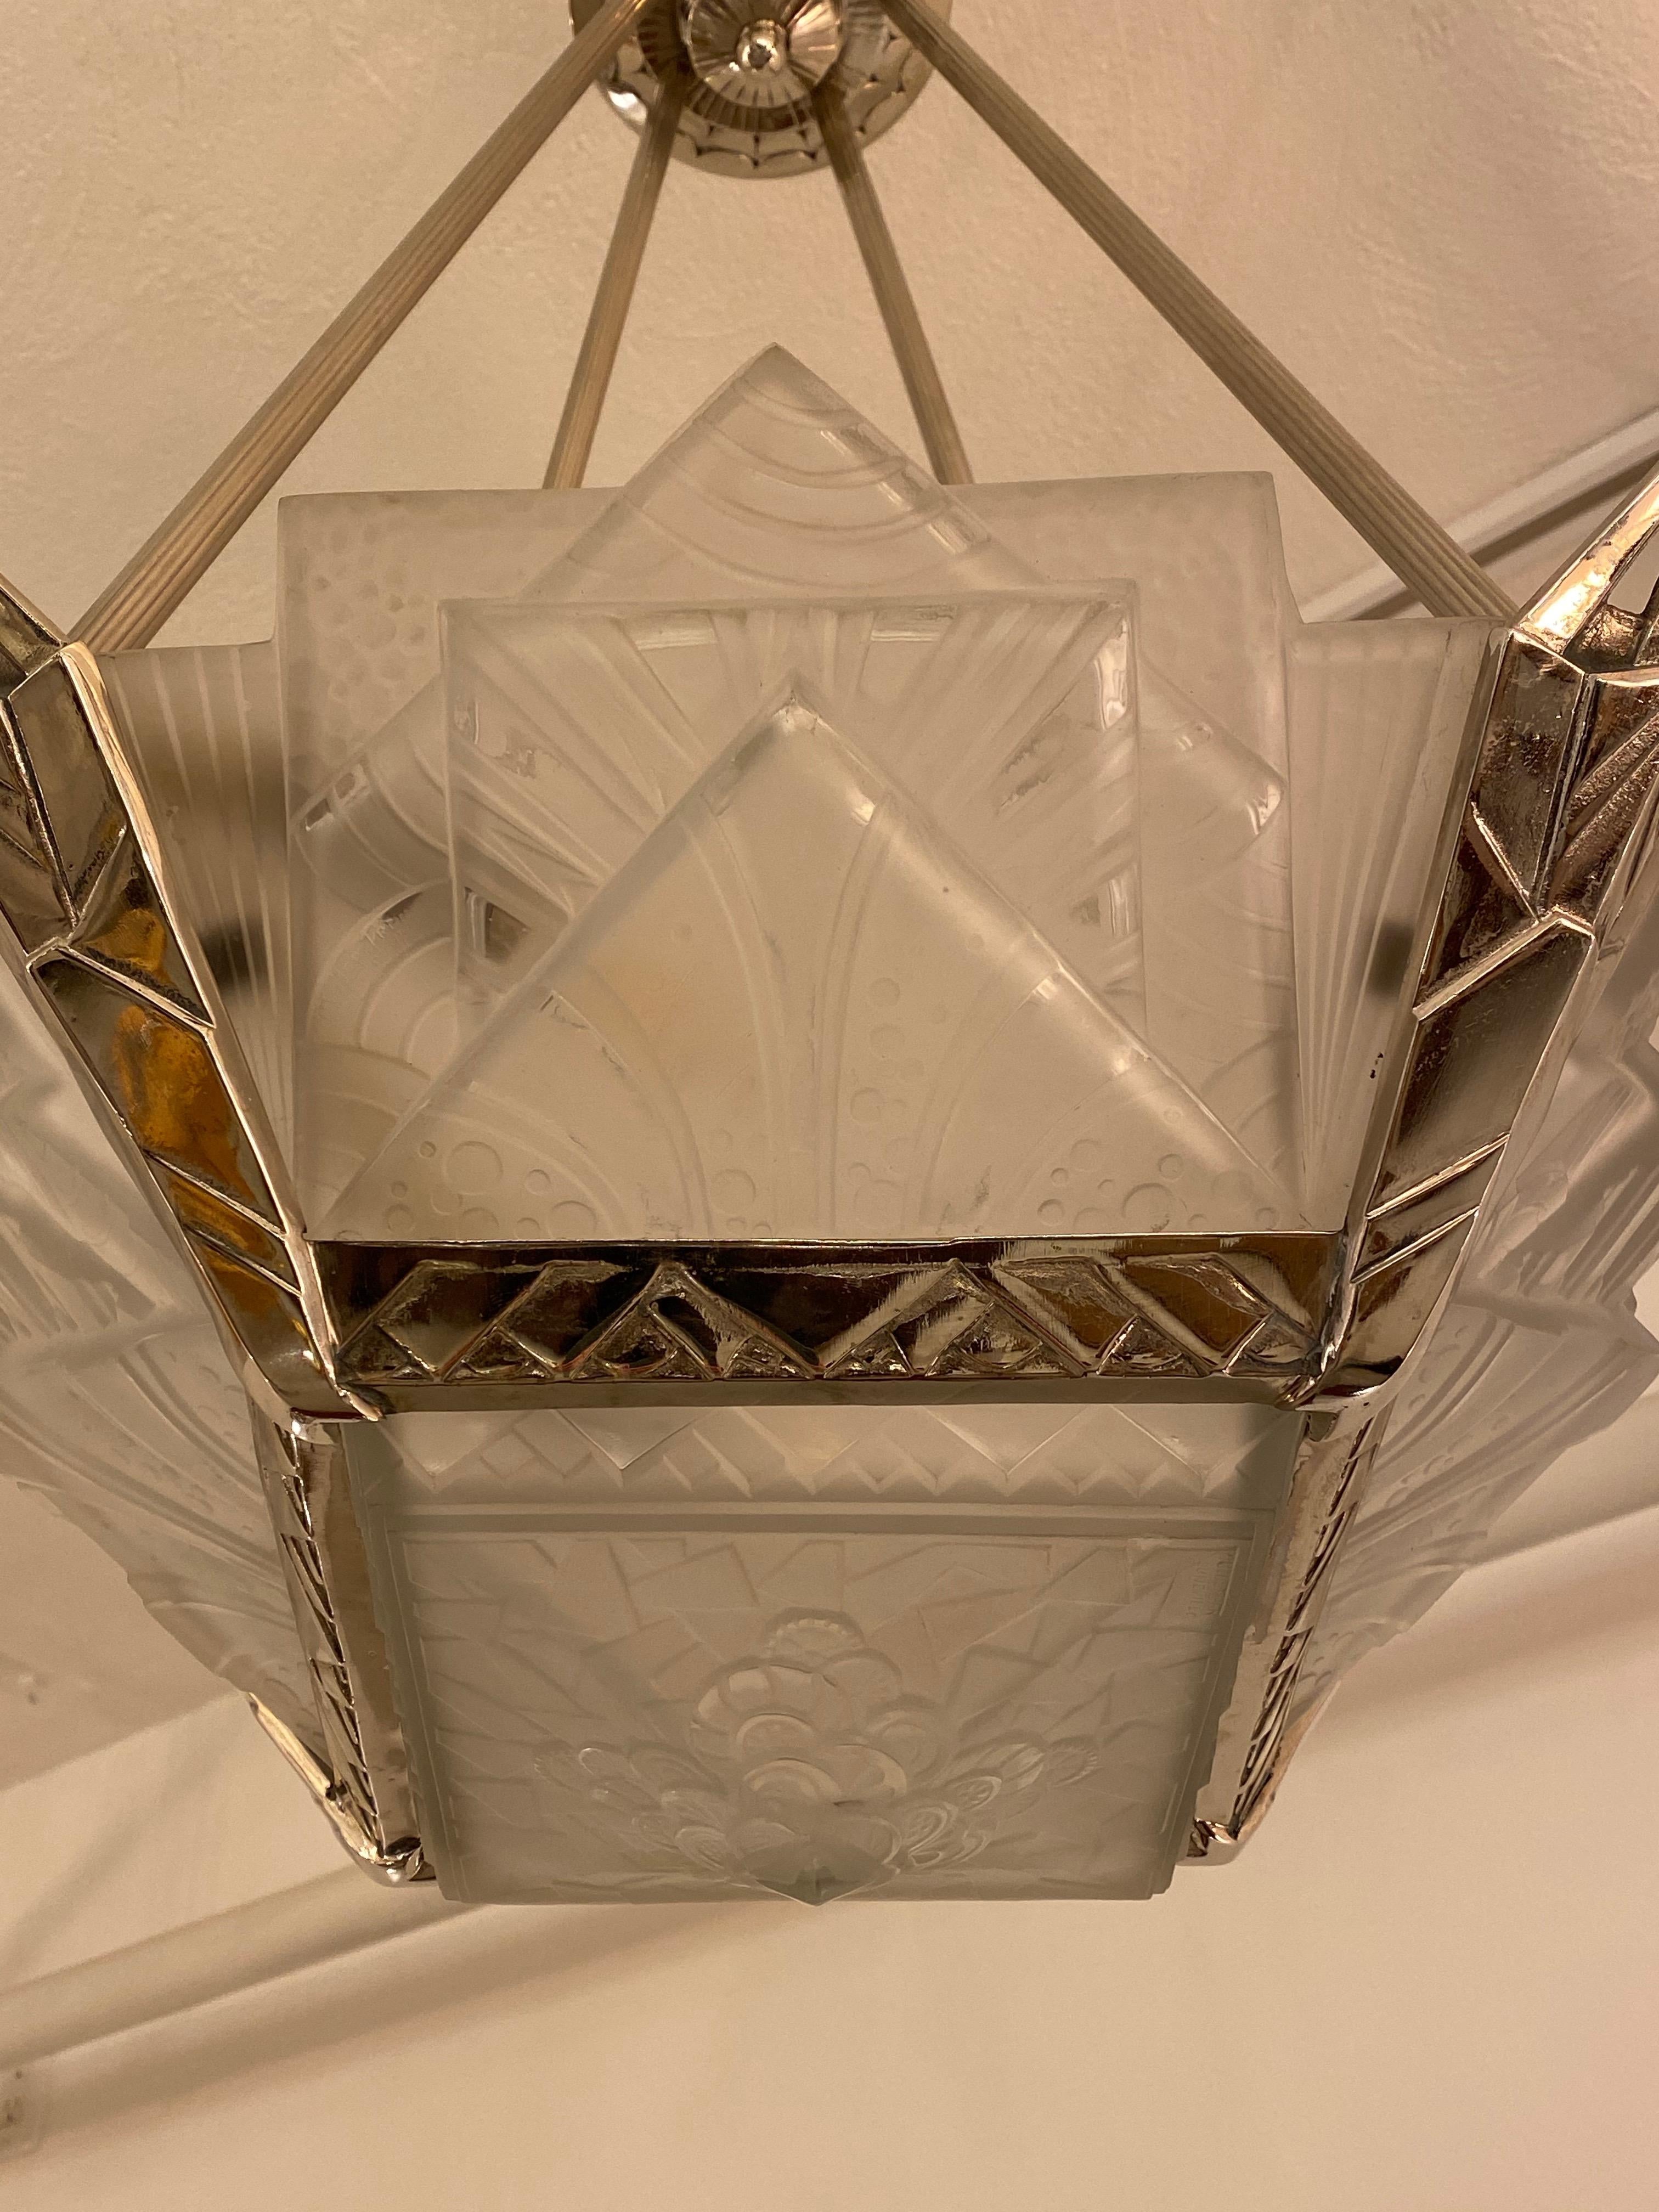 French Art Deco Geometric Chandelier Signed by Muller Frères Luneville In Excellent Condition For Sale In North Bergen, NJ